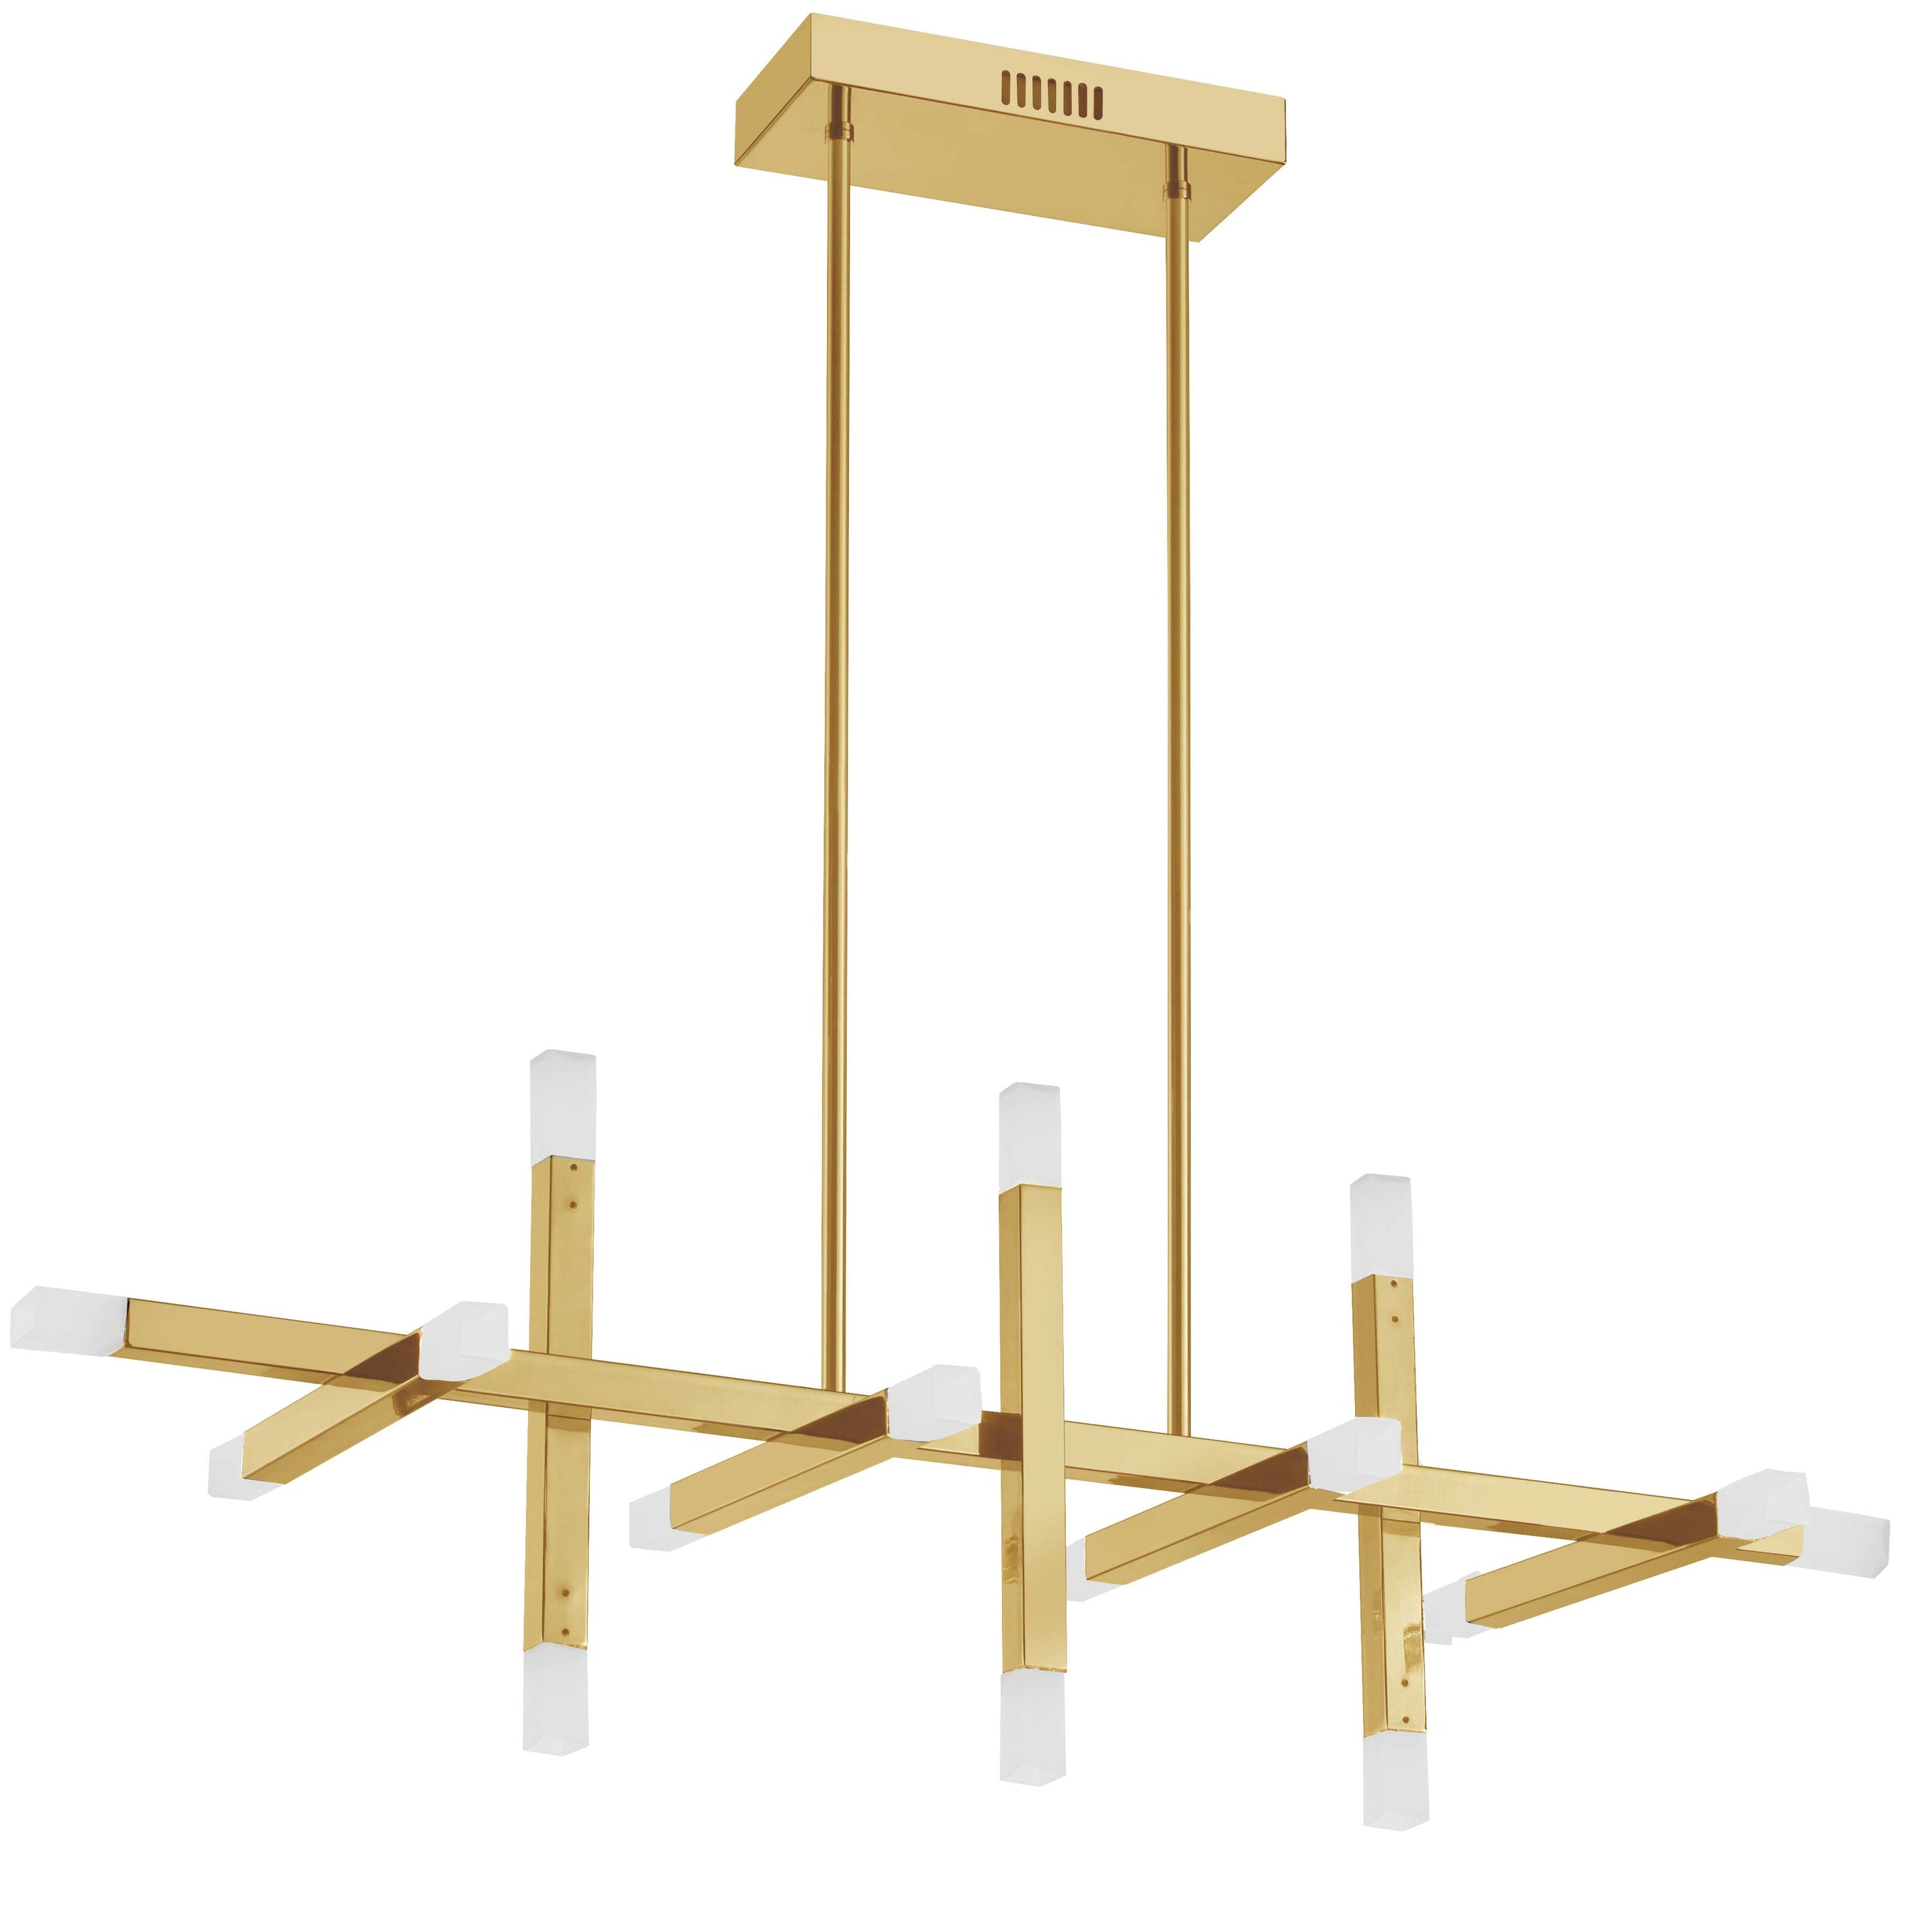 Dainolite Acasia - ACS-4064HC-AGB-FR - 48W Horizontal Chandelier Fixture Aged Brass with Frosted Acrylic Diffuser - Aged Brass